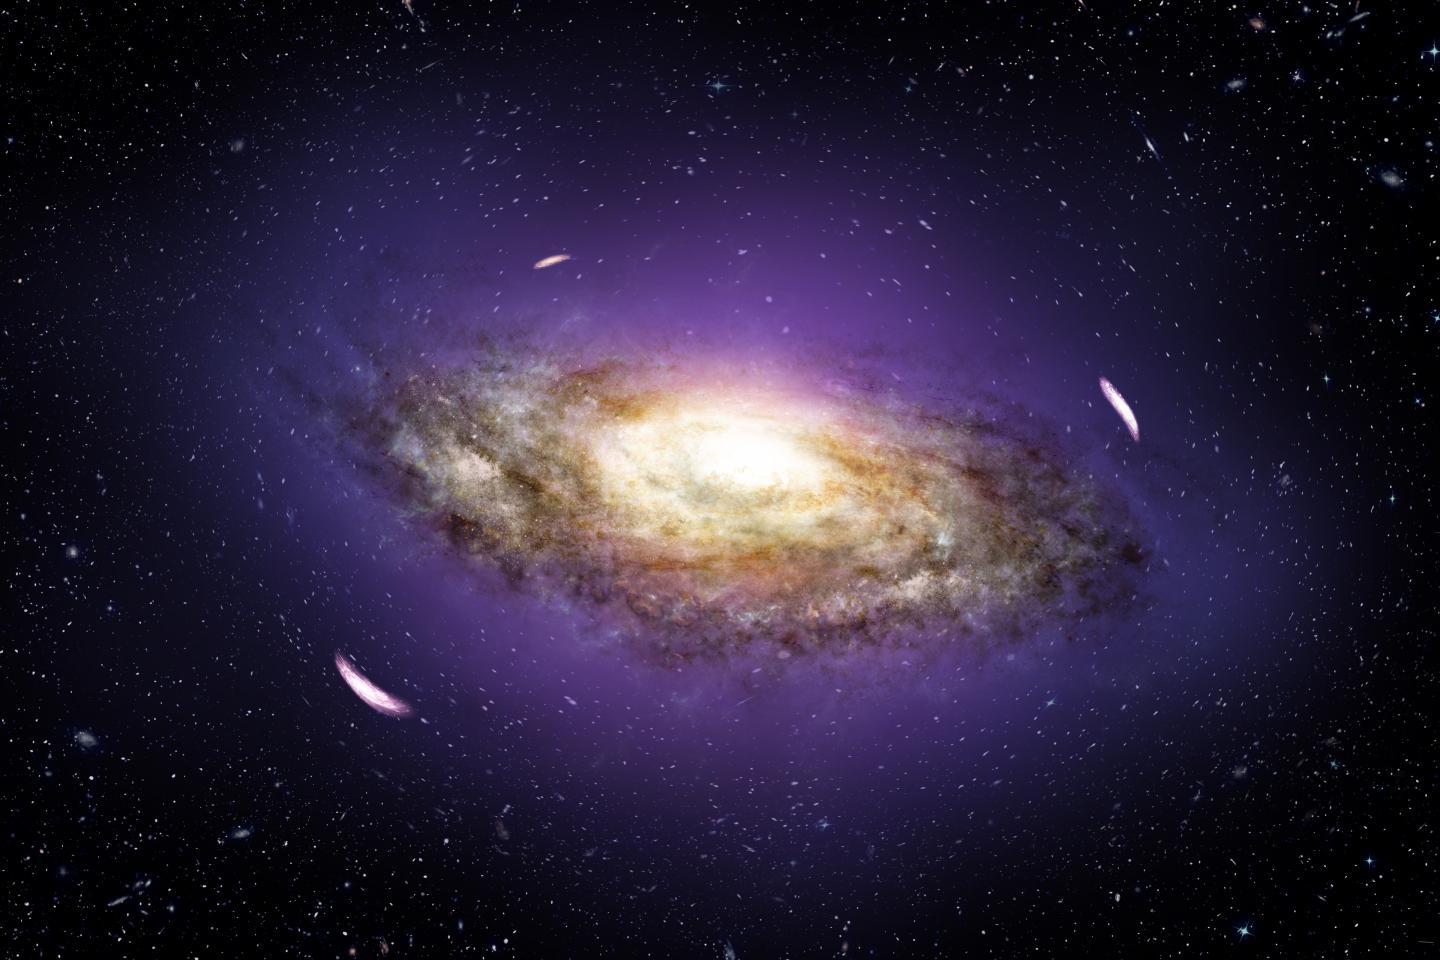 Artist's impression of a galaxy surrounded by gravitational distortions due to dark matter